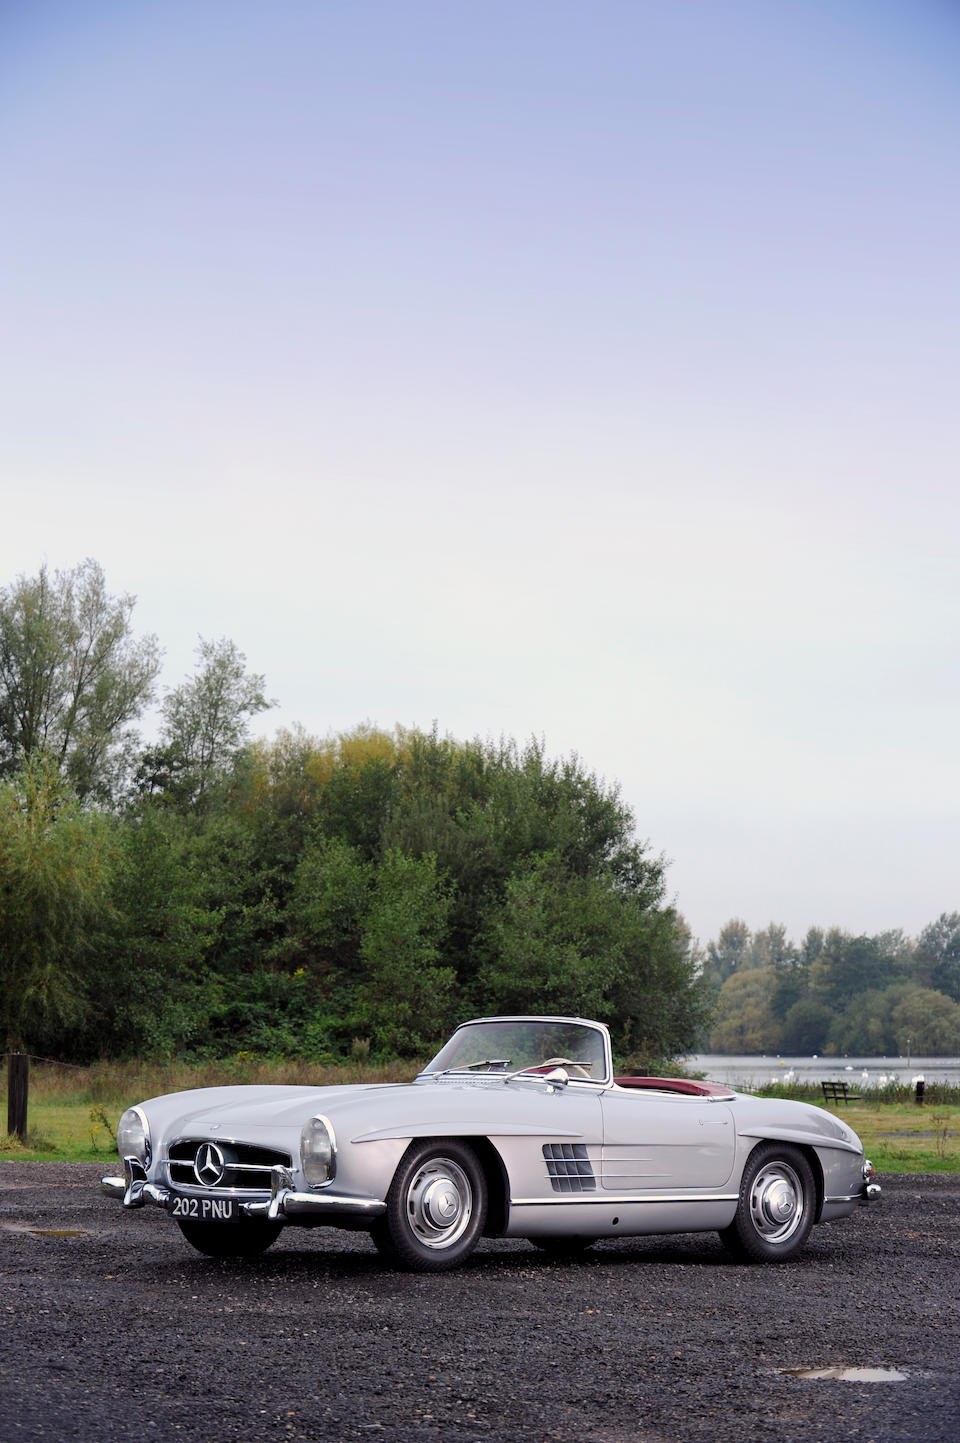 37,000 miles from new,1957 Mercedes 300SL Roadster  Chassis no. 198-042-75-00109 Engine no. 198-980-75-00126